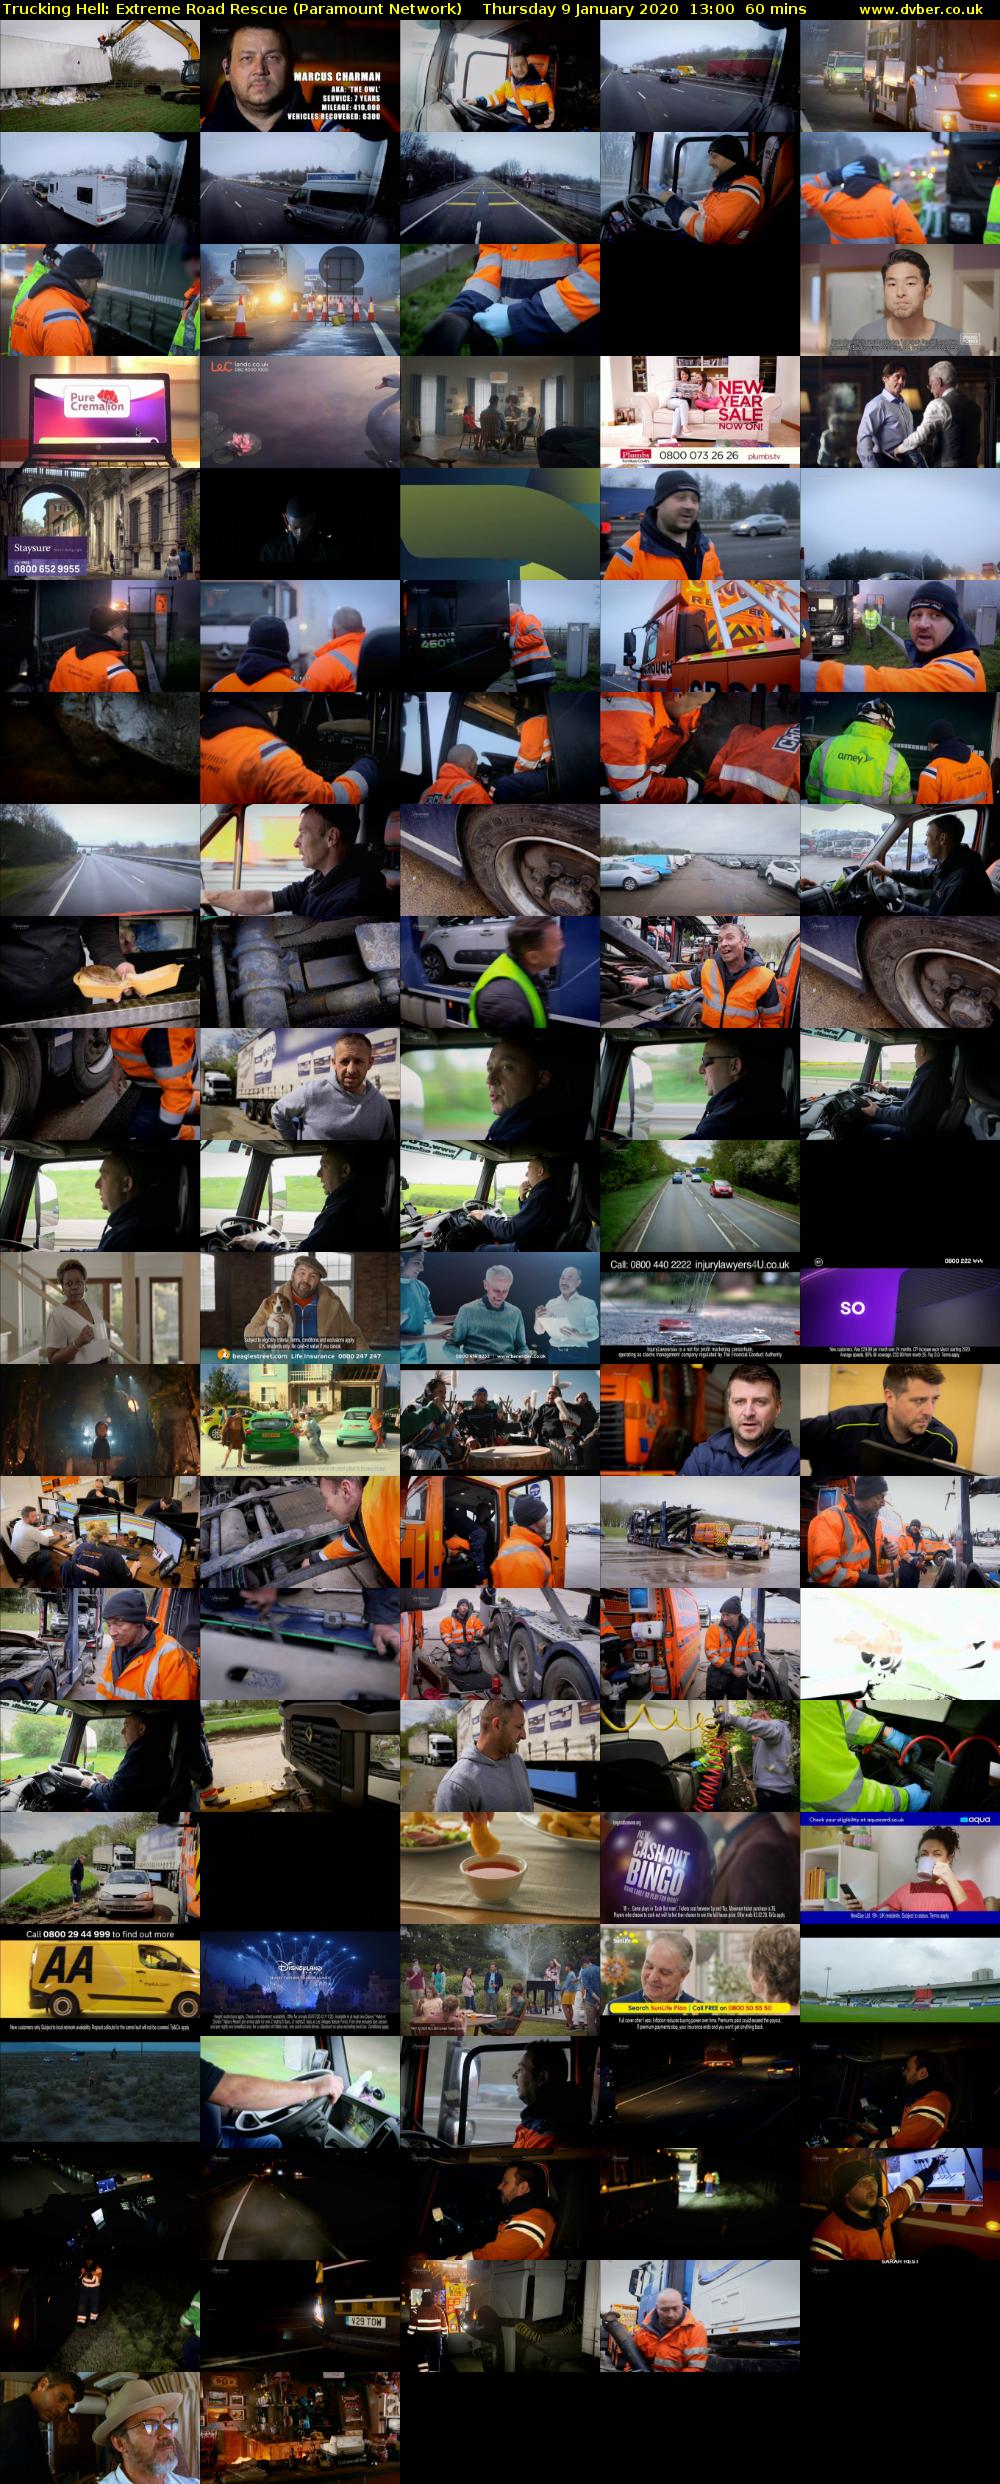 Trucking Hell: Extreme Road Rescue (Paramount Network) Thursday 9 January 2020 13:00 - 14:00